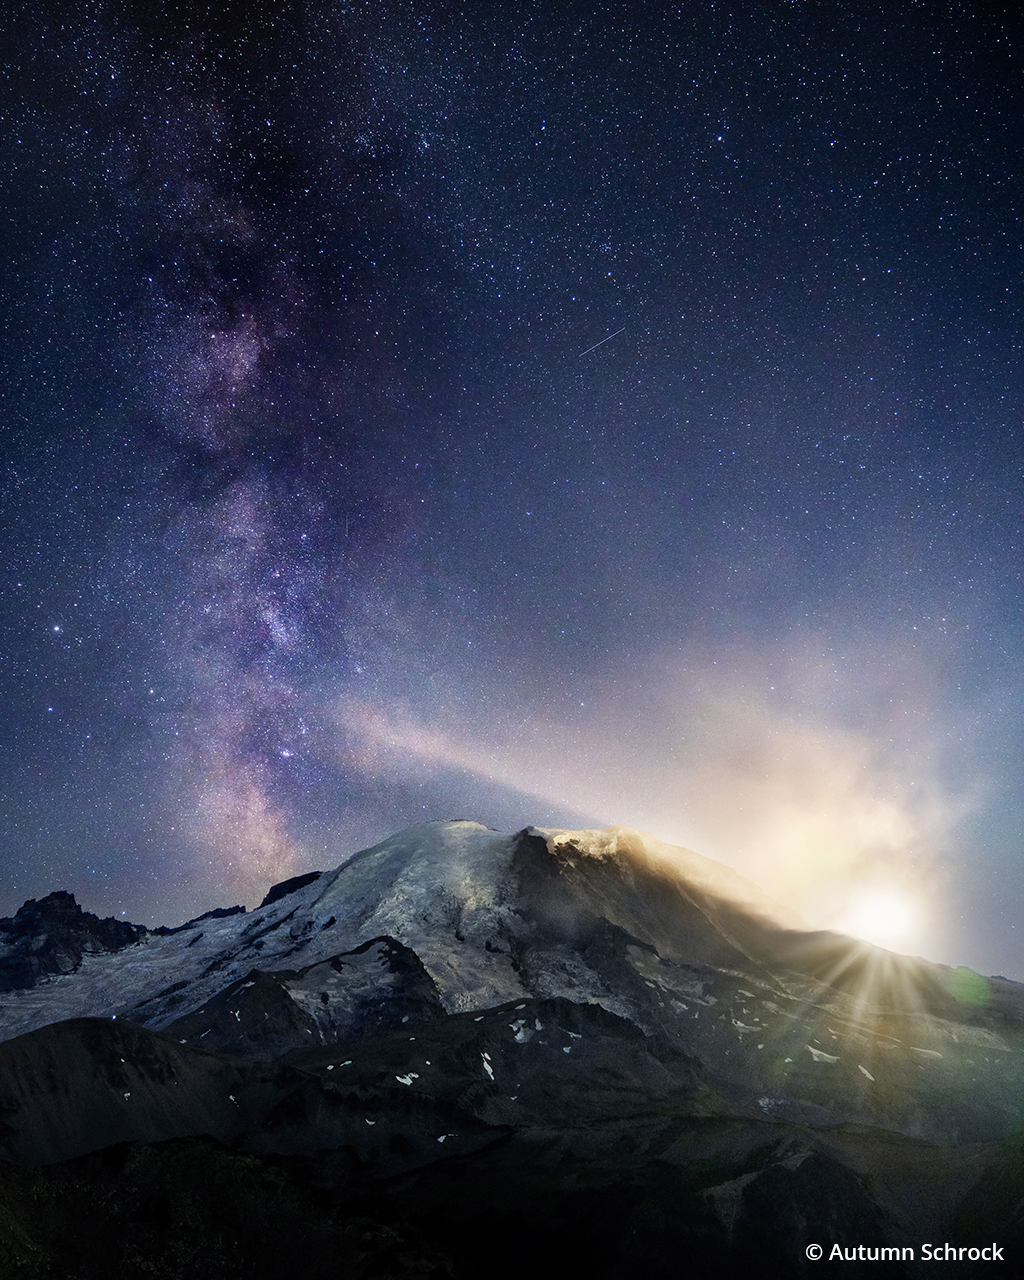 Photograph of the moon and Milky Way at Mount Rainier National Park.